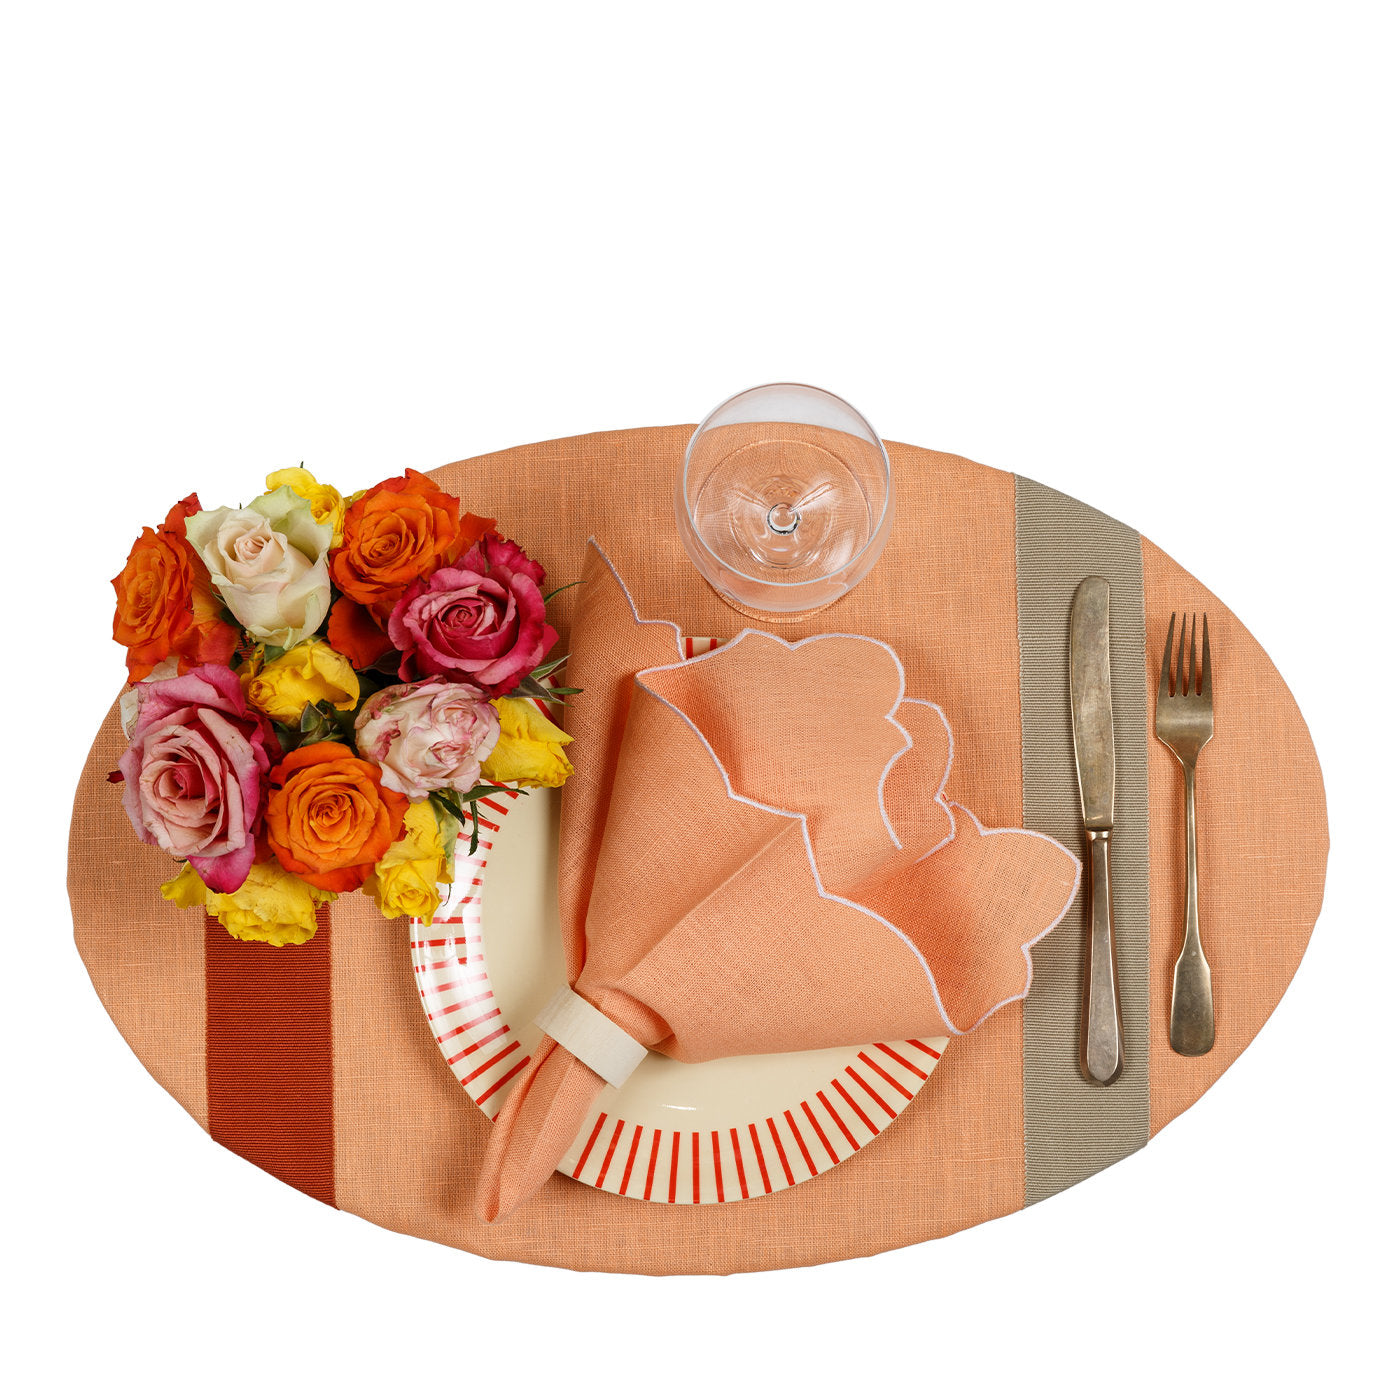 Set of 1 placemat and 1 napkin - Tray - Alternative view 1